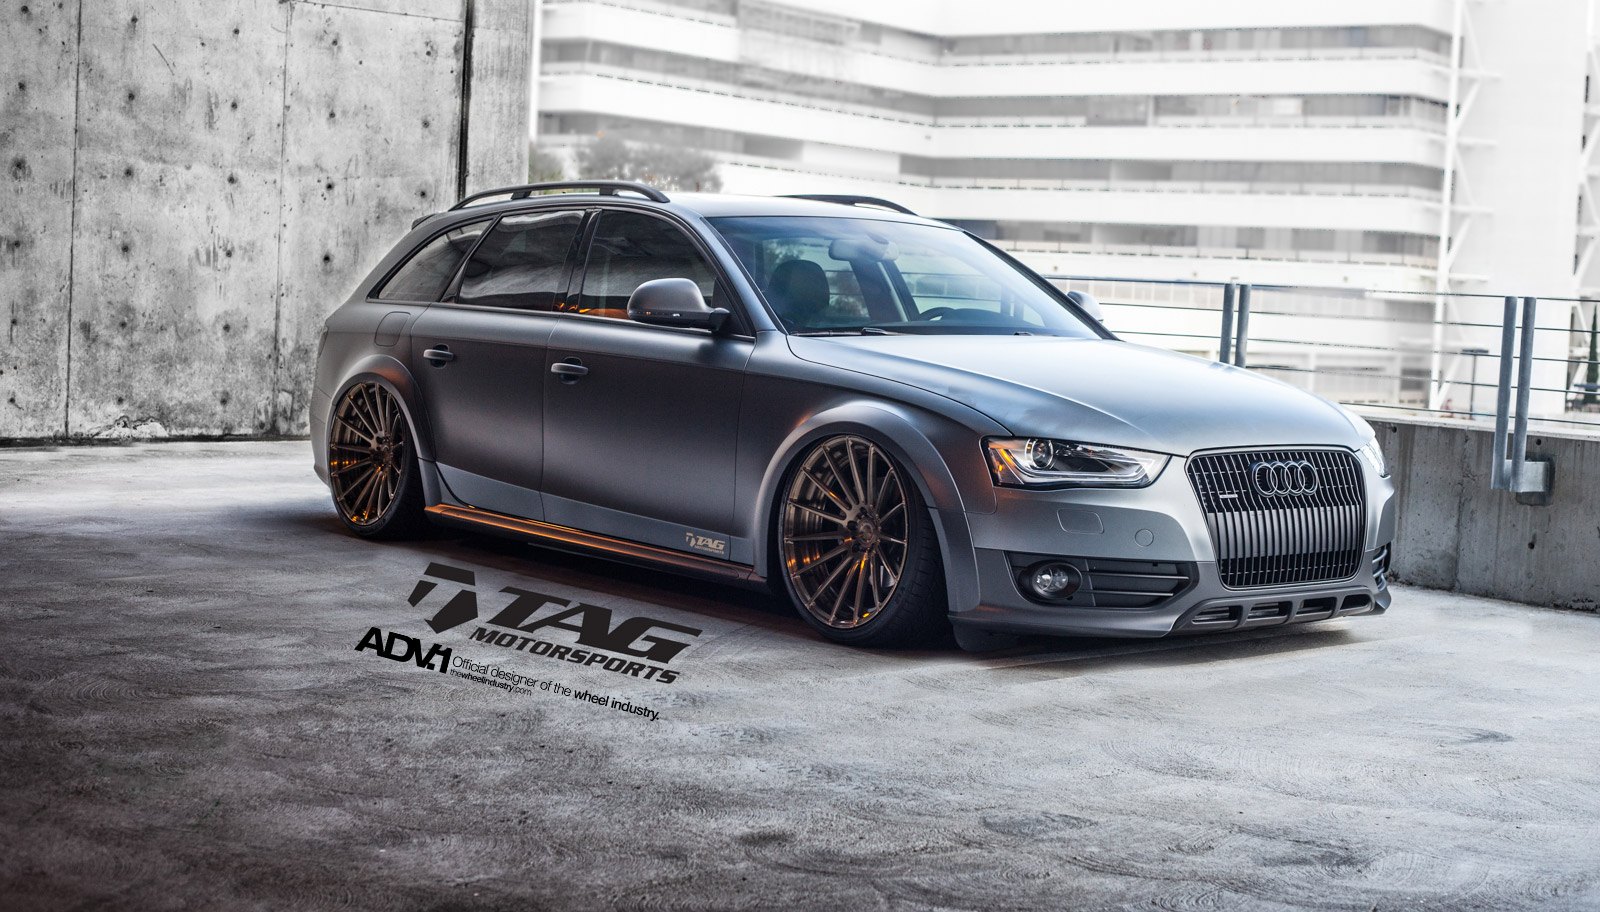 Gray Matte Audi A4 with Aftermarket Front Bumper - Photo by ADV.1